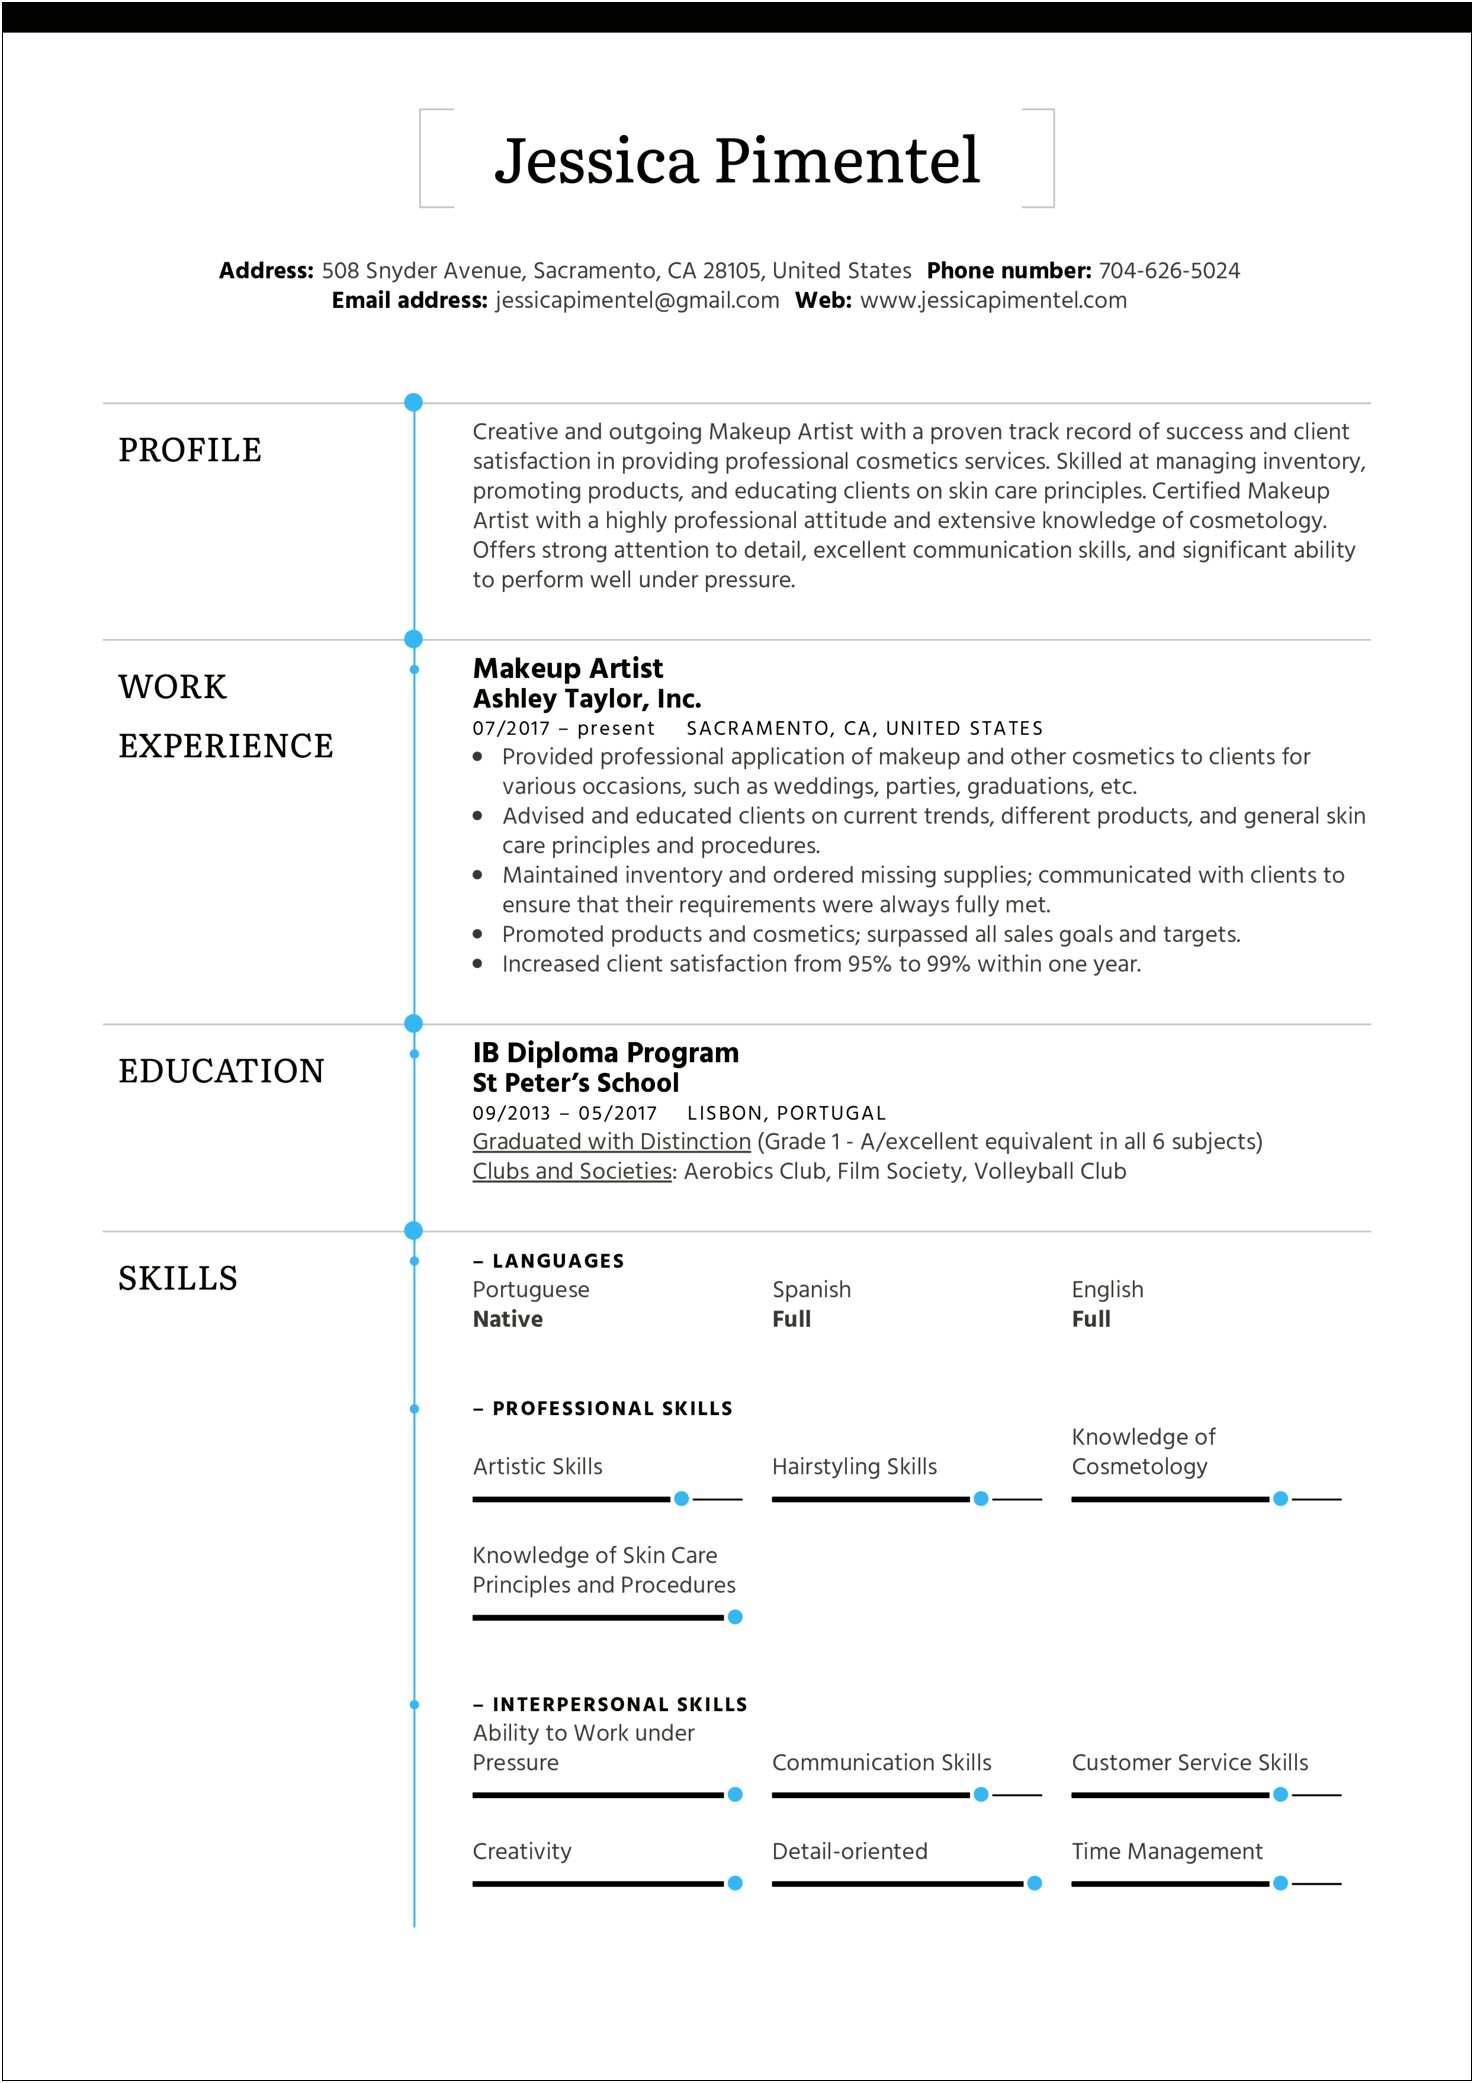 Skin Care Objective For Resume